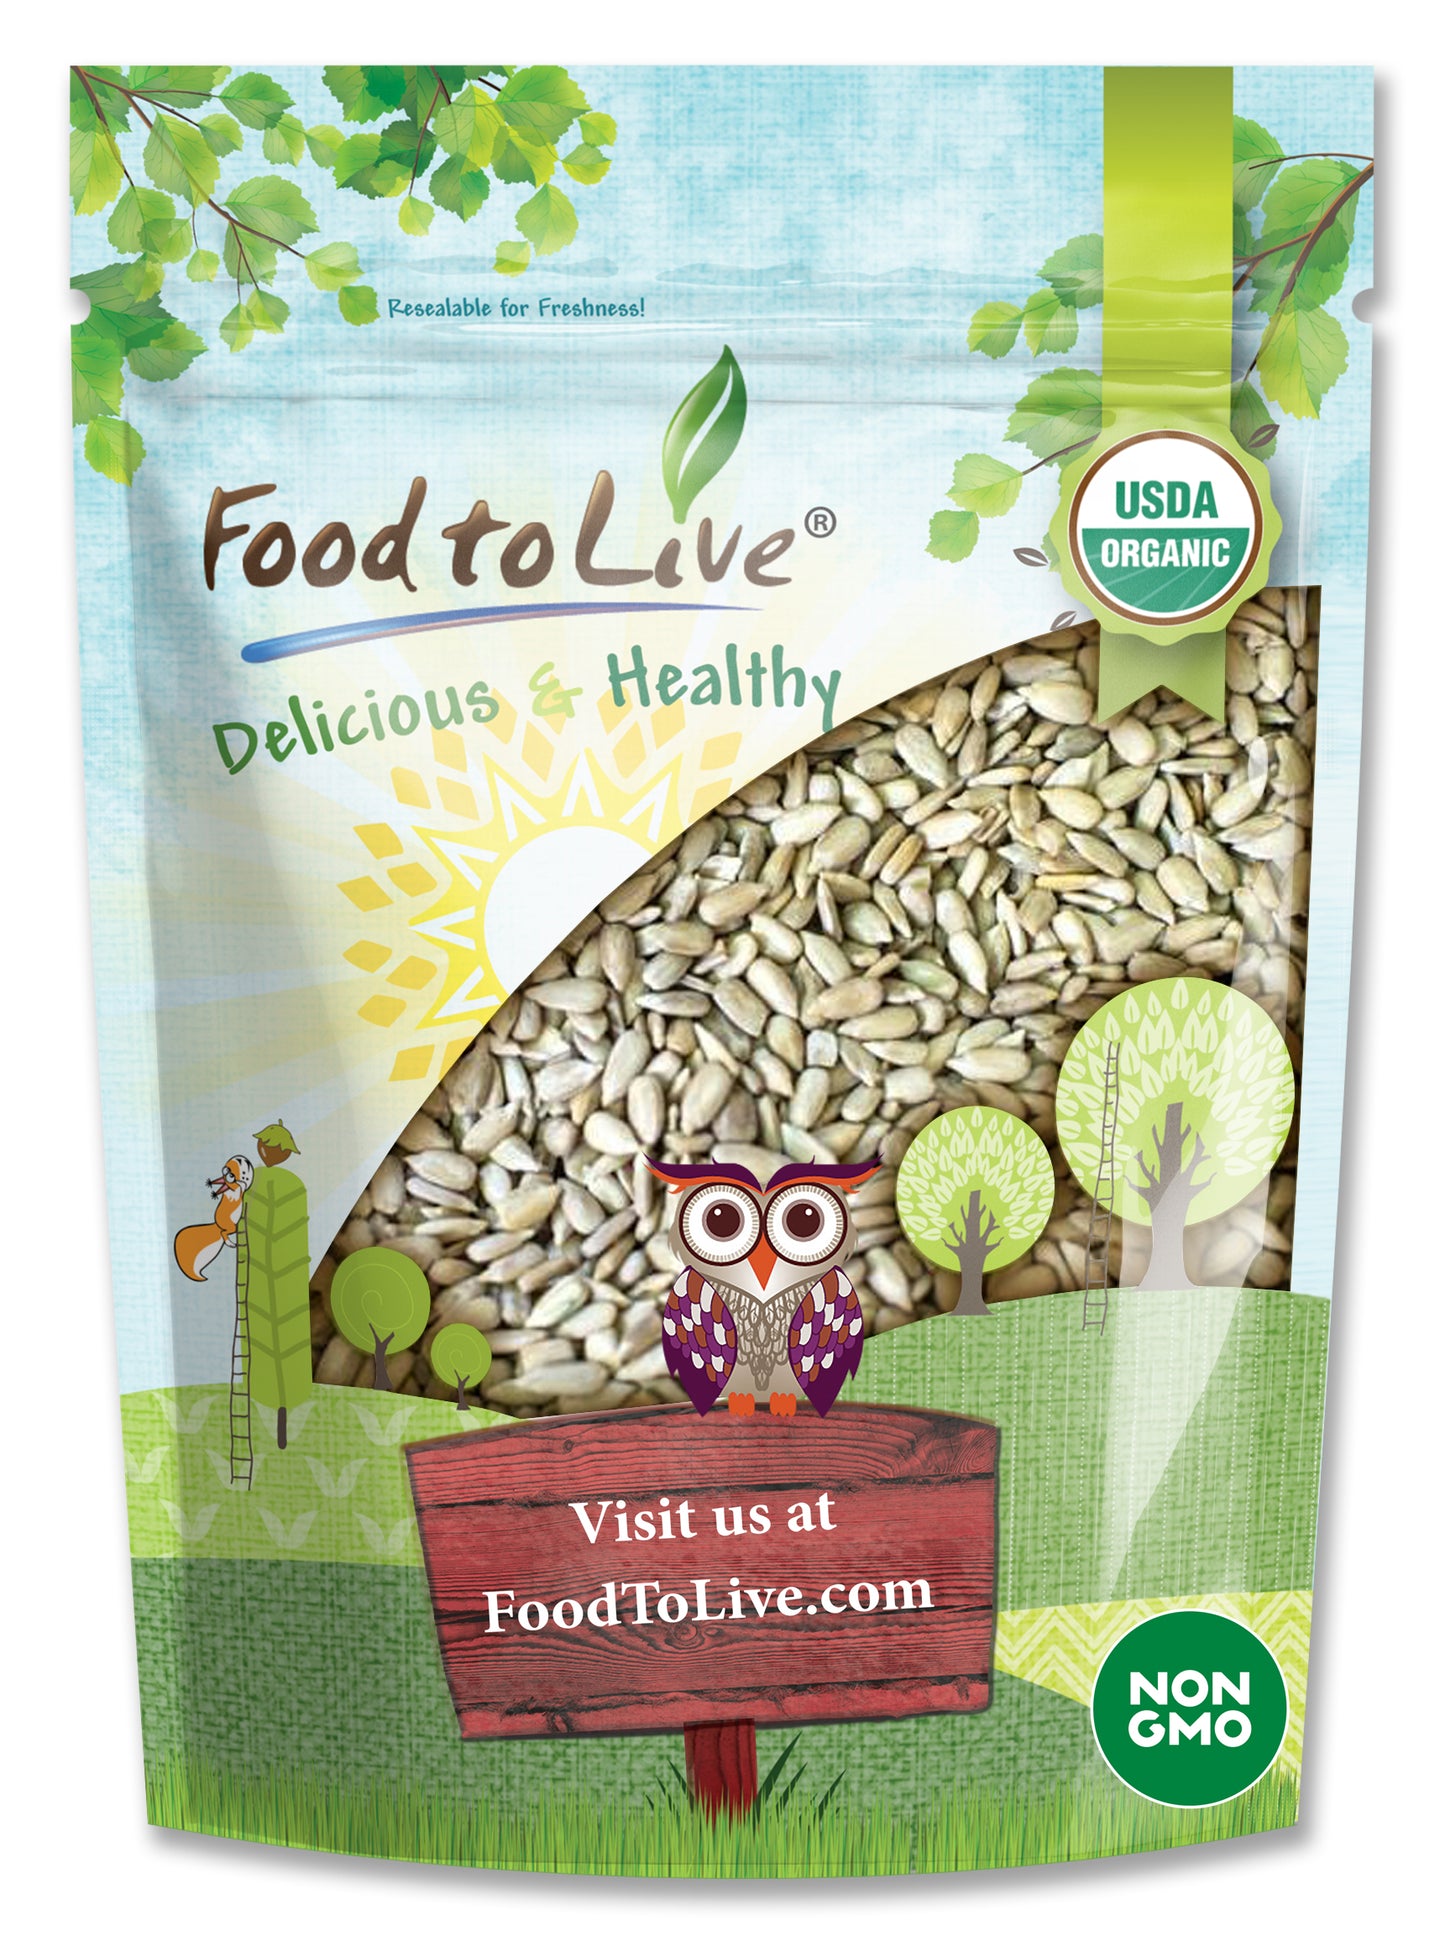 Organic Sprouted Sunflower Seeds — Non-GMO, Kosher, No Shell, Unsalted, Raw Kernels, Vegan Superfood, Sirtfood, Bulk - by Food to Live